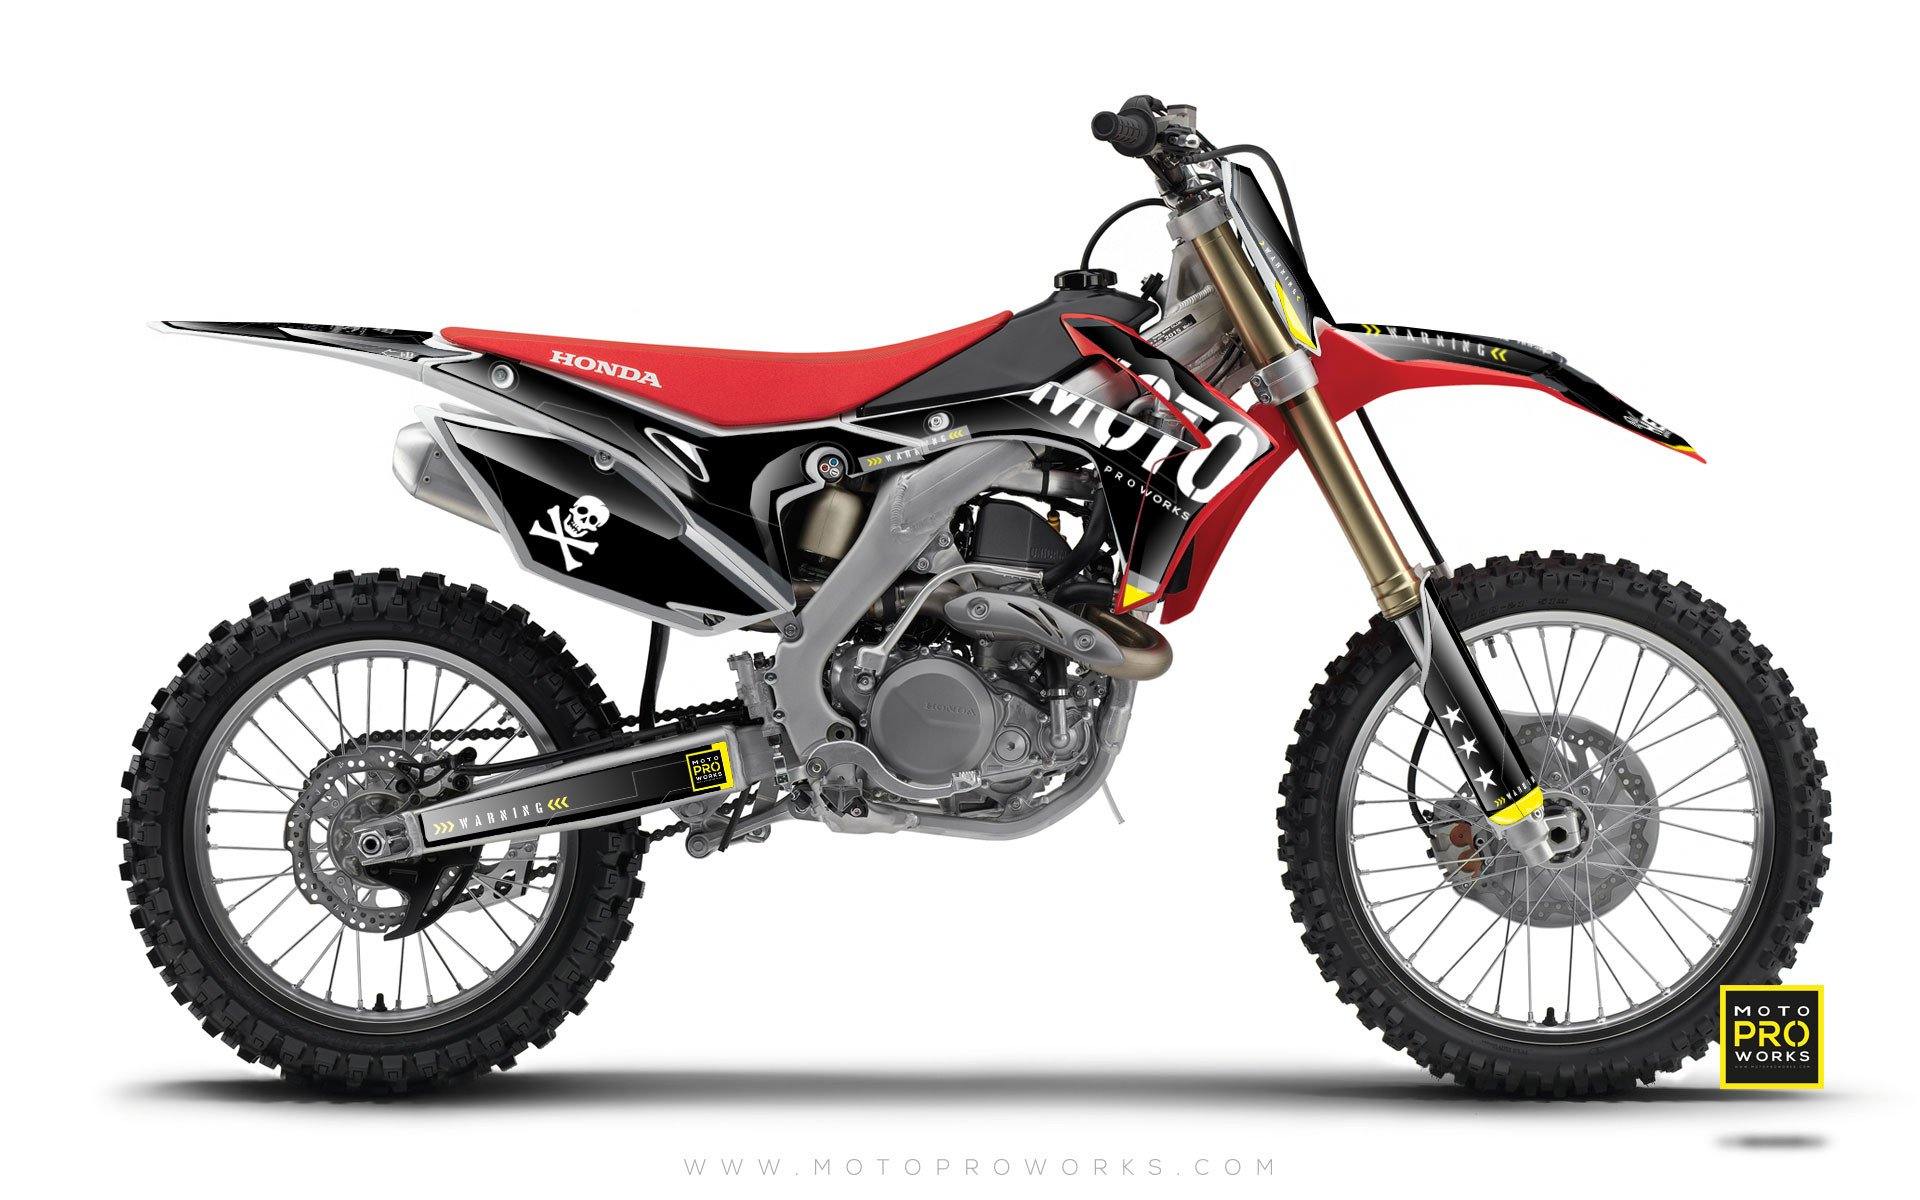 Honda GRAPHIC KIT - "GTECH" (black) - MotoProWorks | Decals and Bike Graphic kit